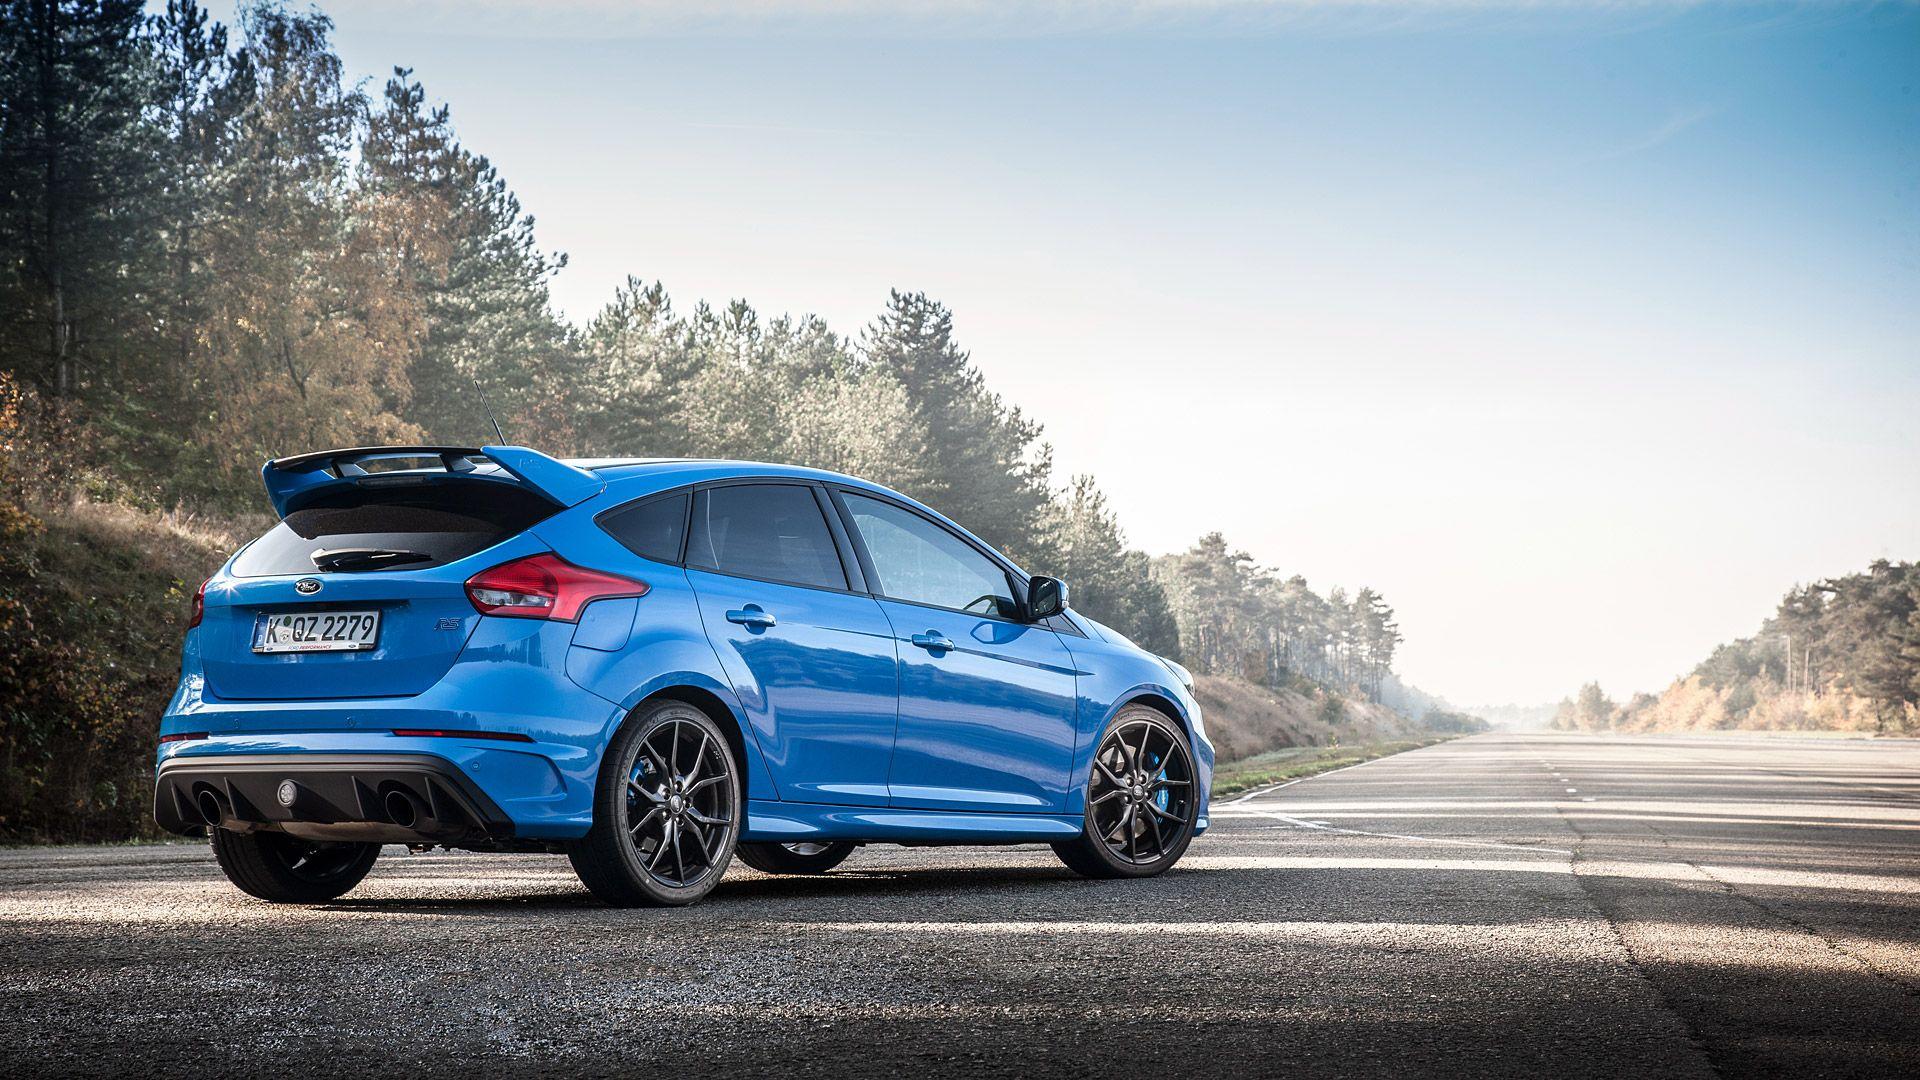 2010 Ford Focus RS Le Mans Edition Wallpaper and Image Gallery